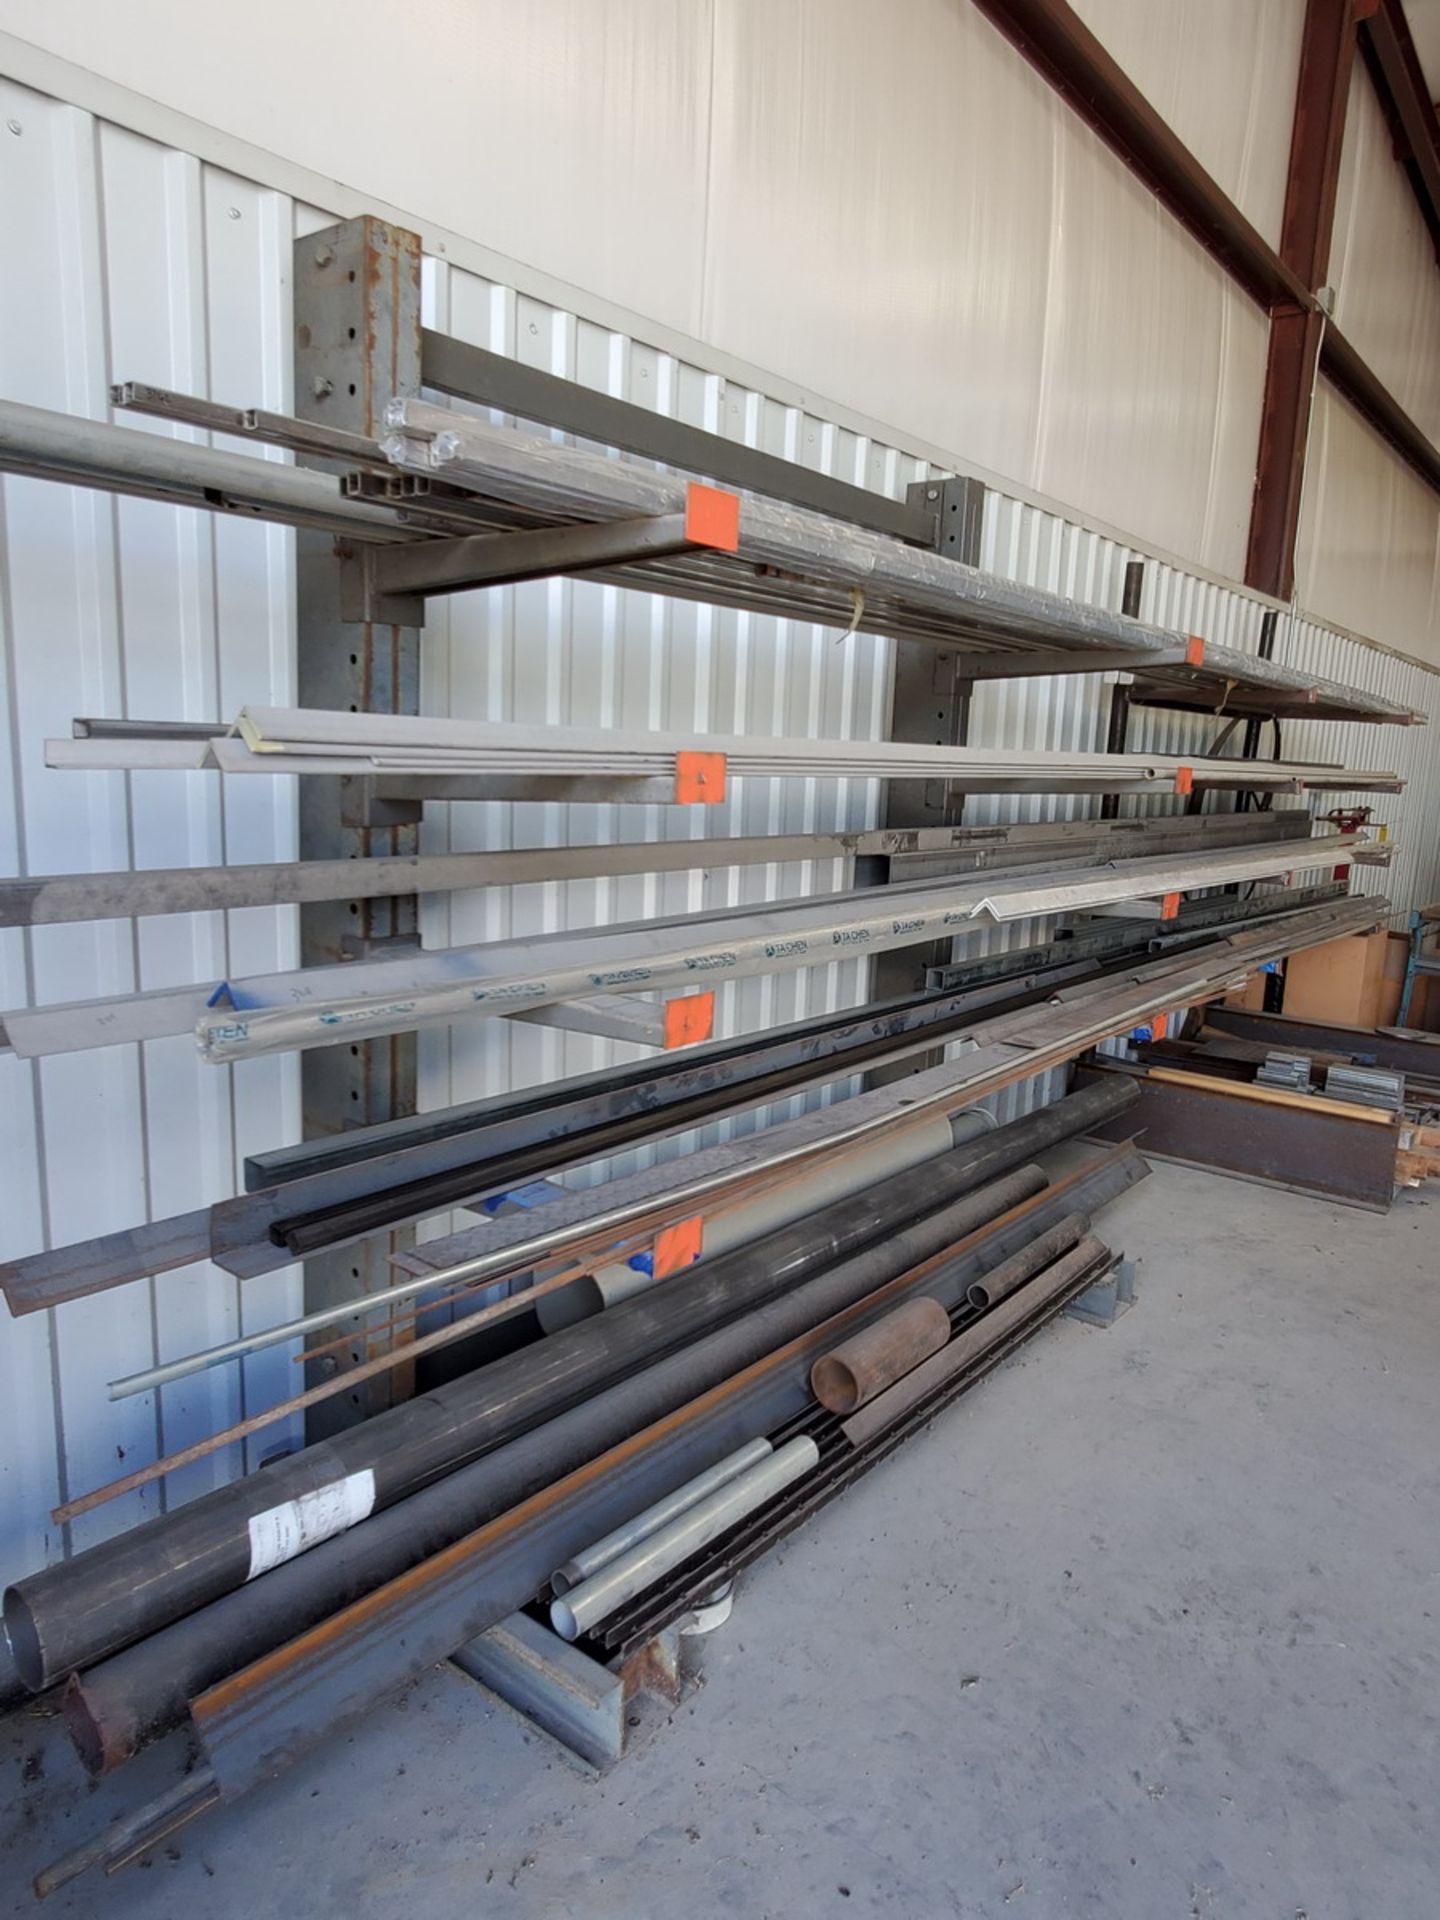 5-Tier Cantilever Rack 32" x 80" x 90" - Image 2 of 3